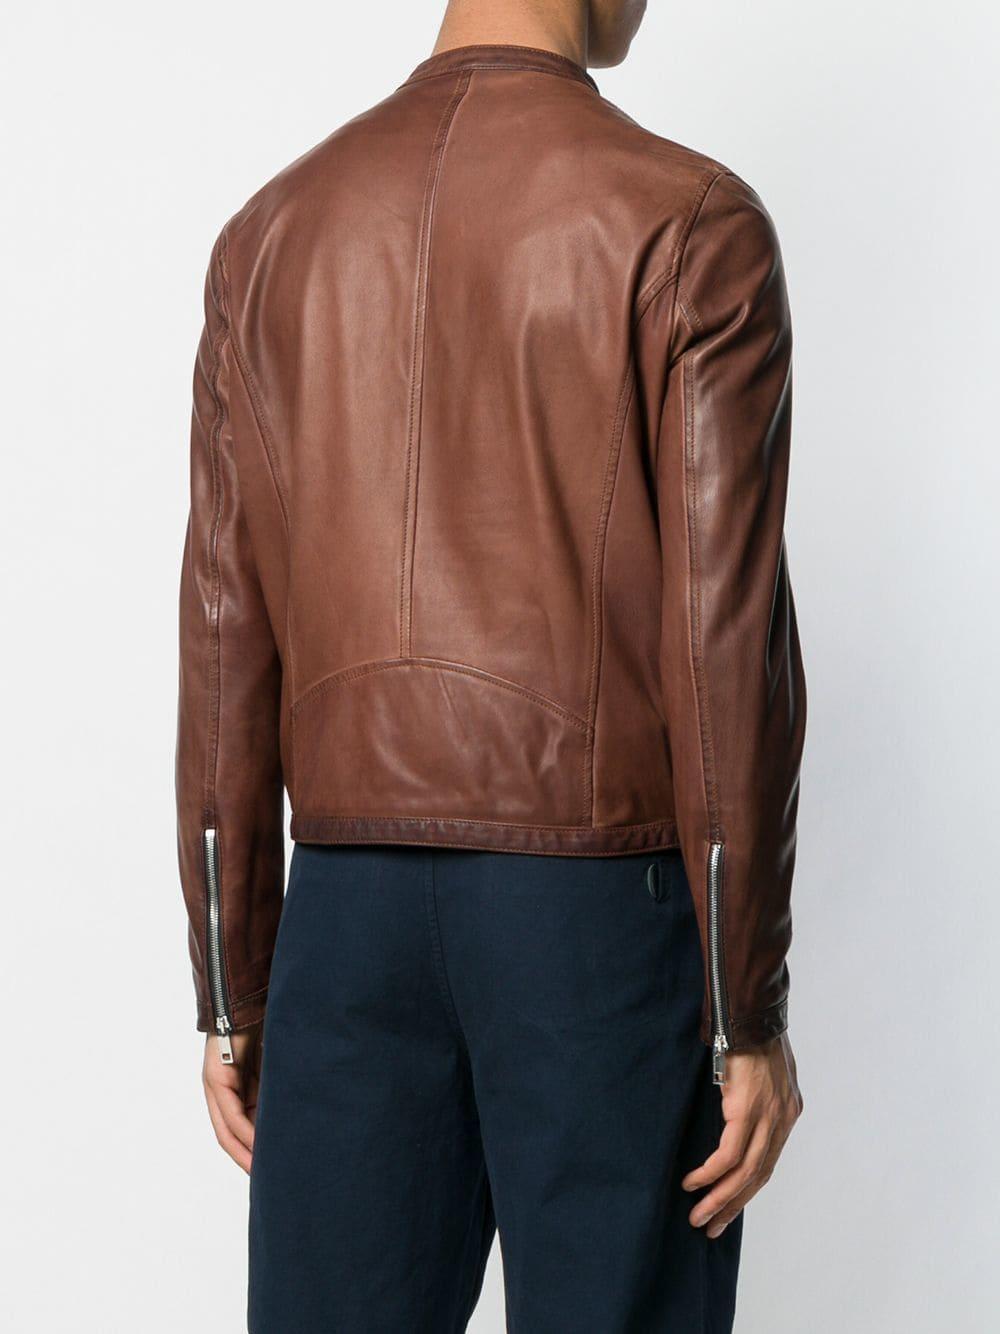 Tagliatore Zipped Leather Jacket in Brown for Men - Lyst